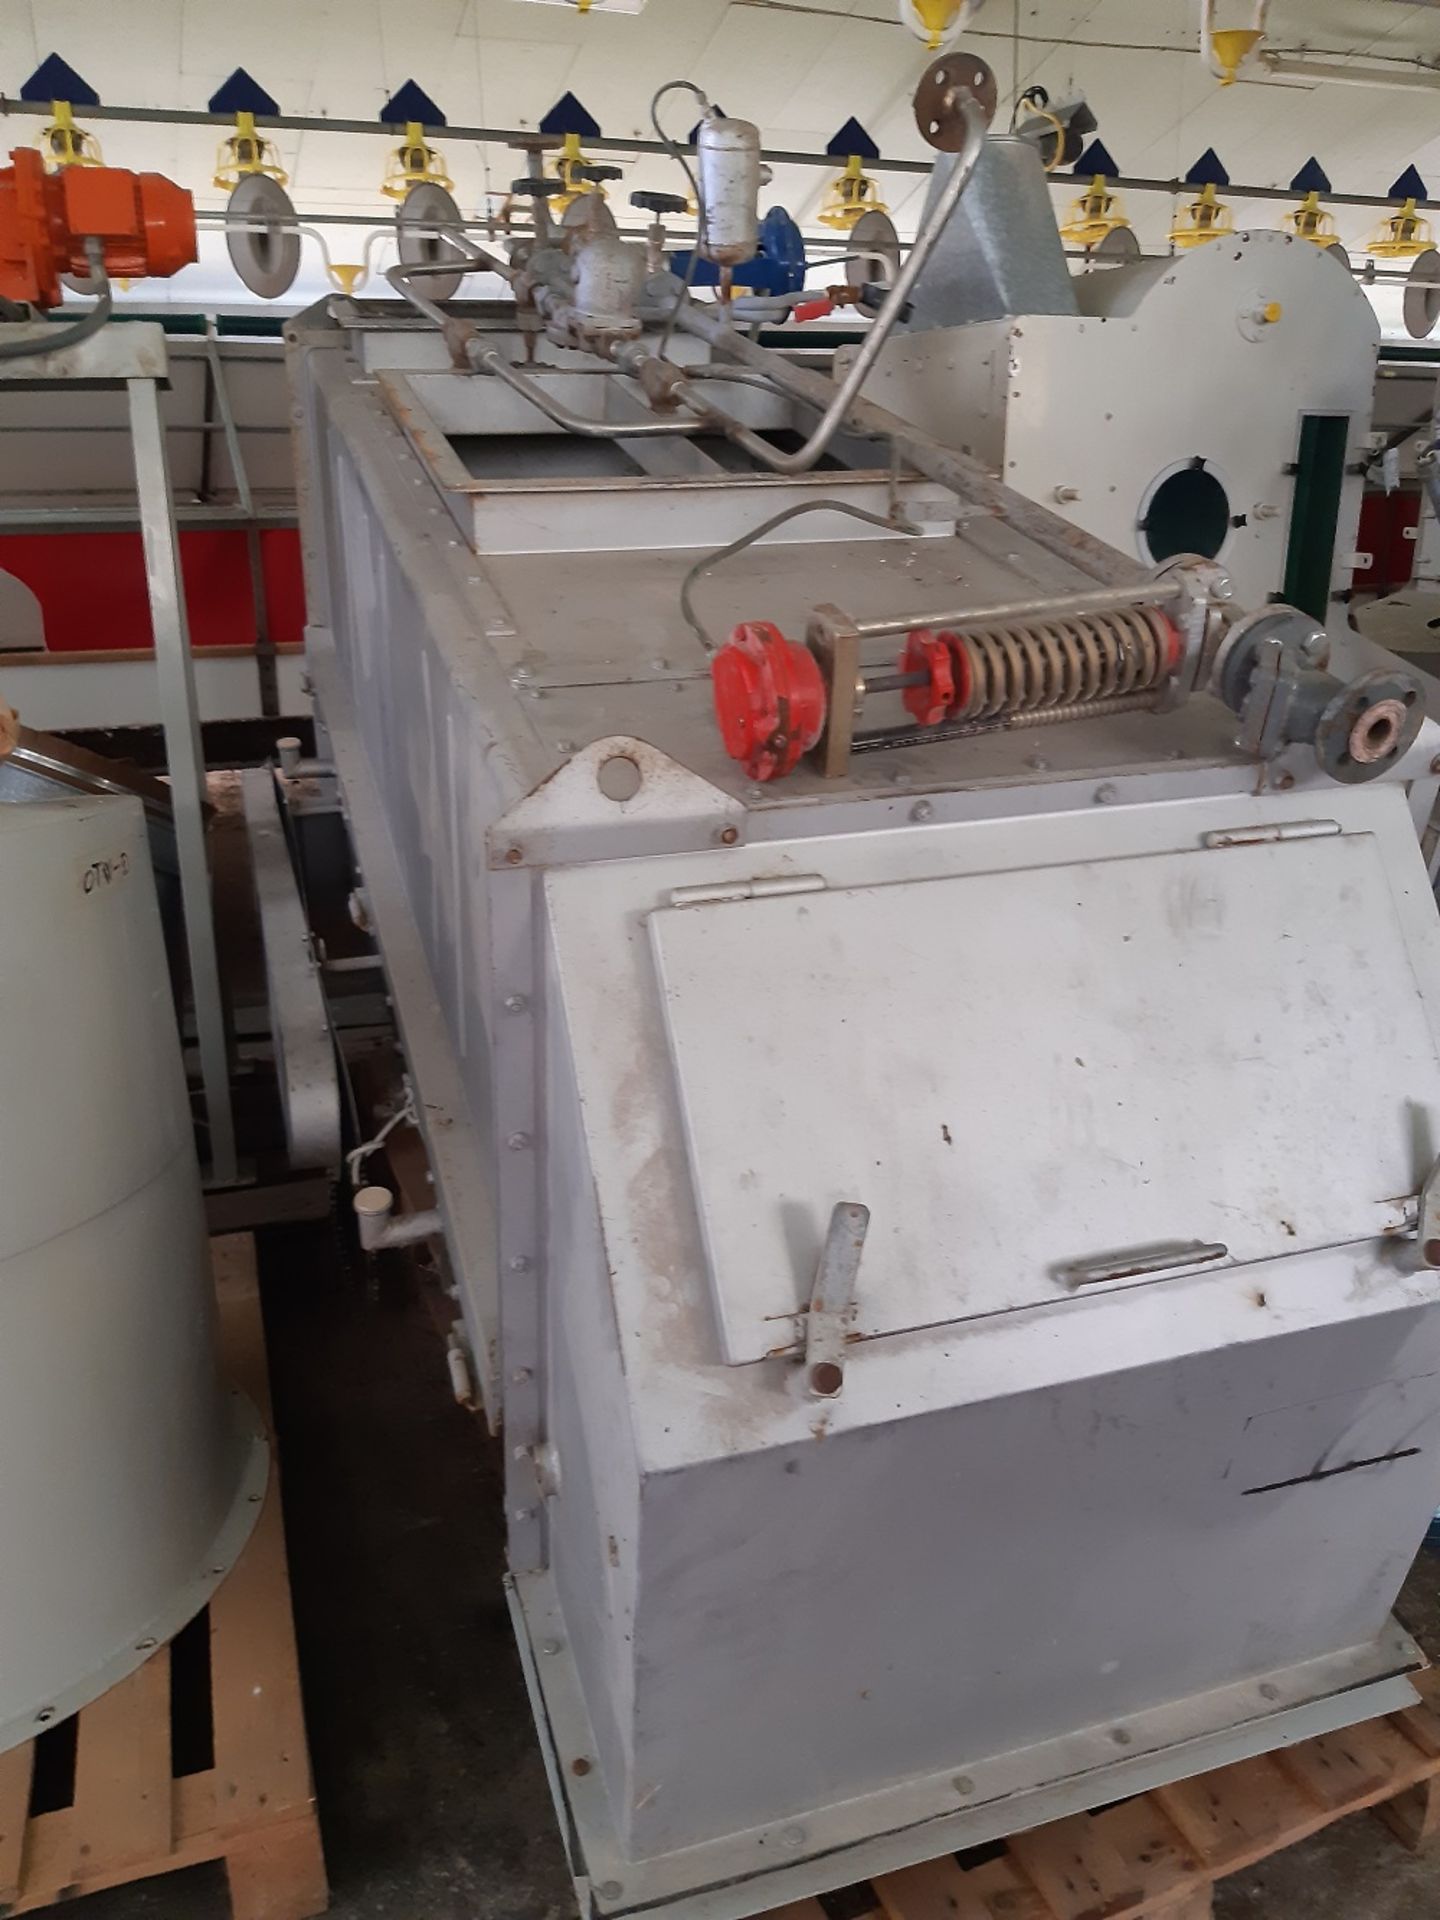 Bed Dryer - Buhler OTW 150 fluid bed dryer/cooler, new 1998 but never used. It can be used to dry or - Image 2 of 11